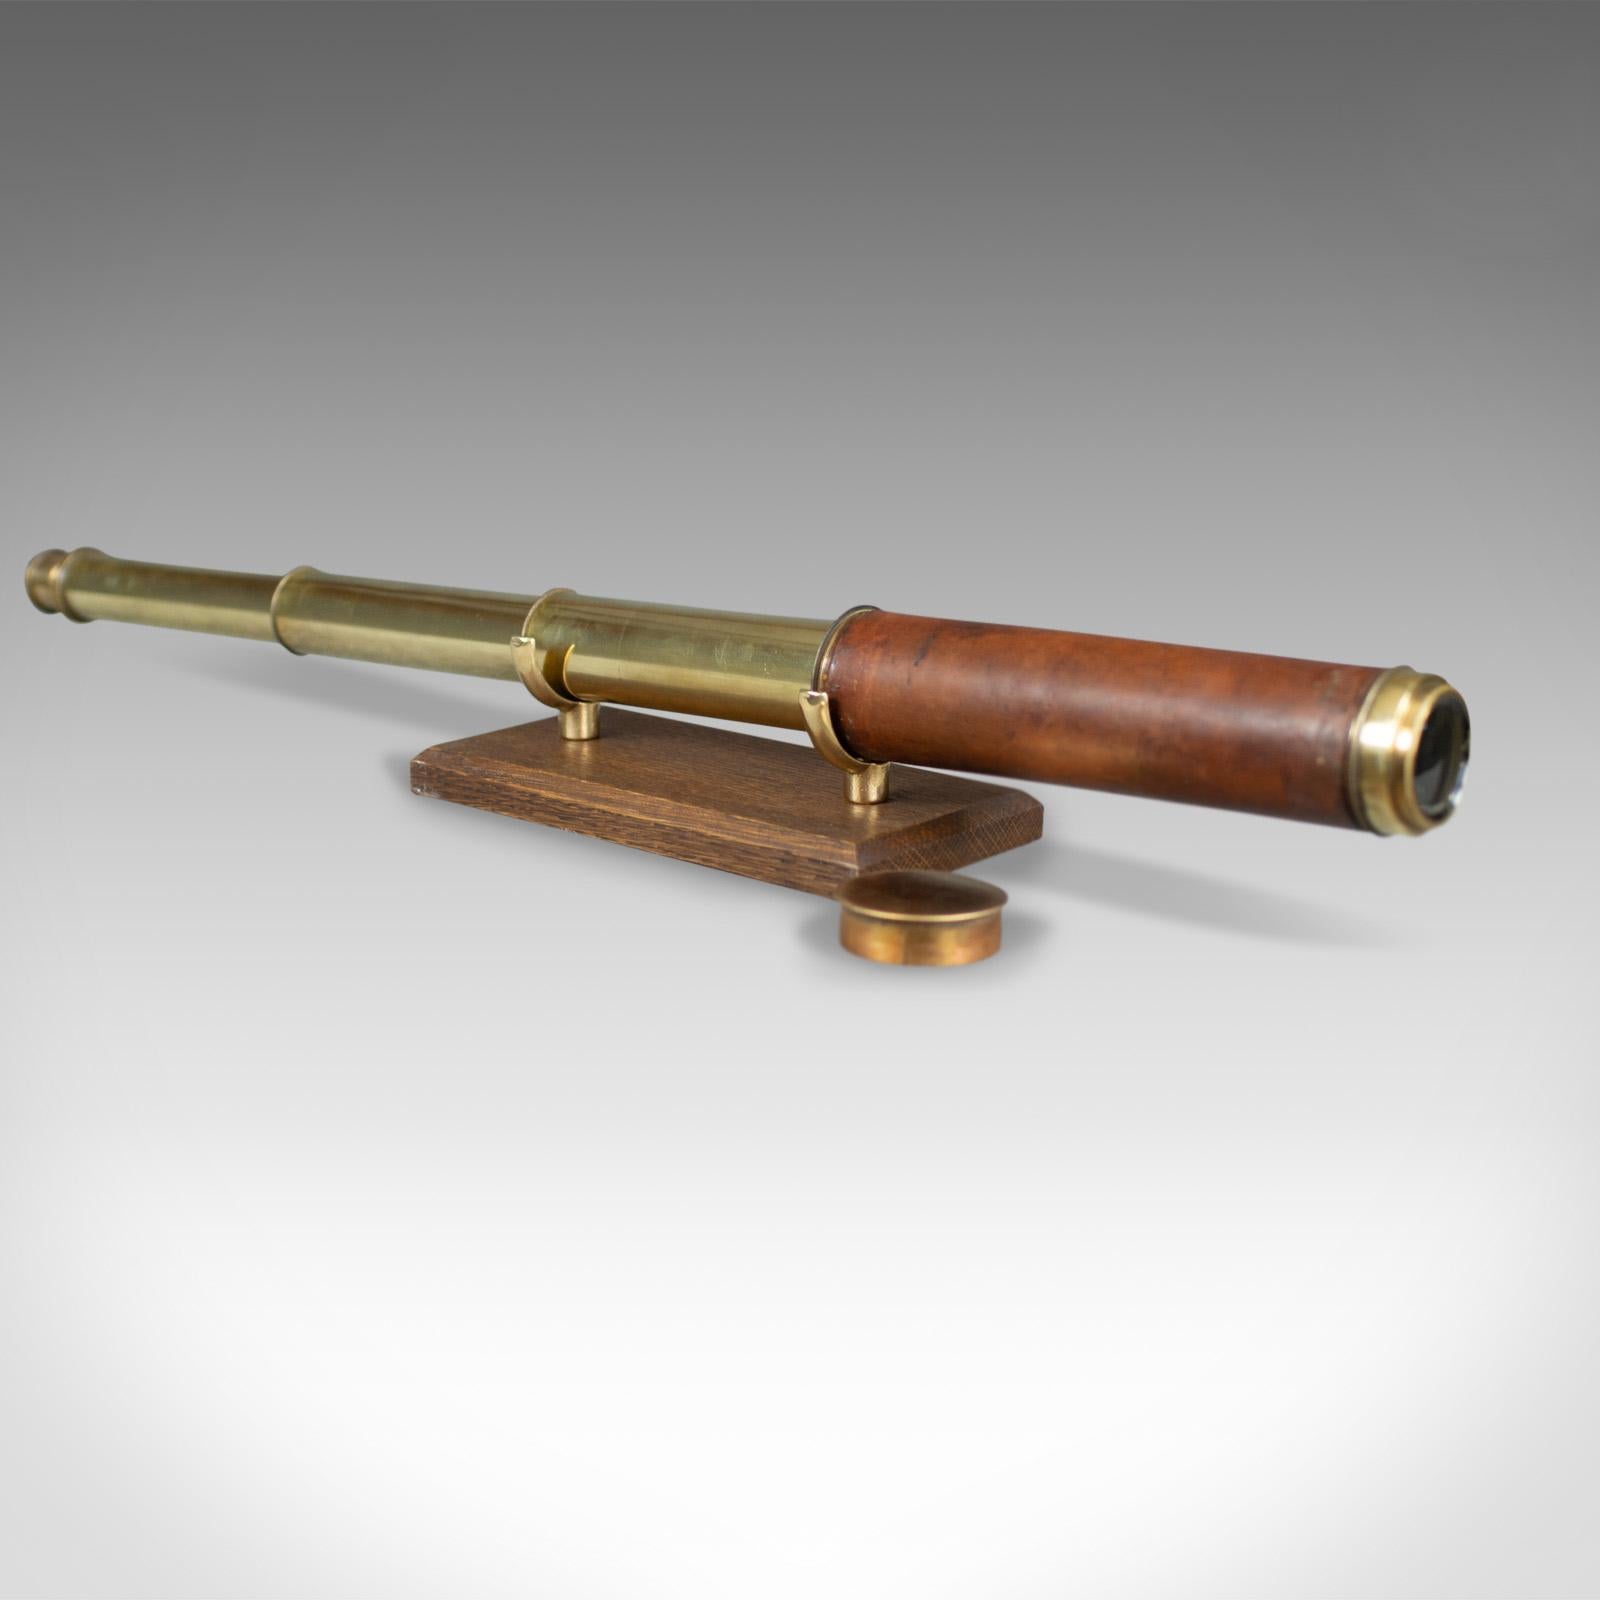 Our Stock # 18.5076

This is an antique telescope dating to the early 19th century, a three draw scope suitable for terrestrial or astronomical use, circa 1830.

Perfect for bird watching, landscape appreciation, wildlife, or maritime observation.